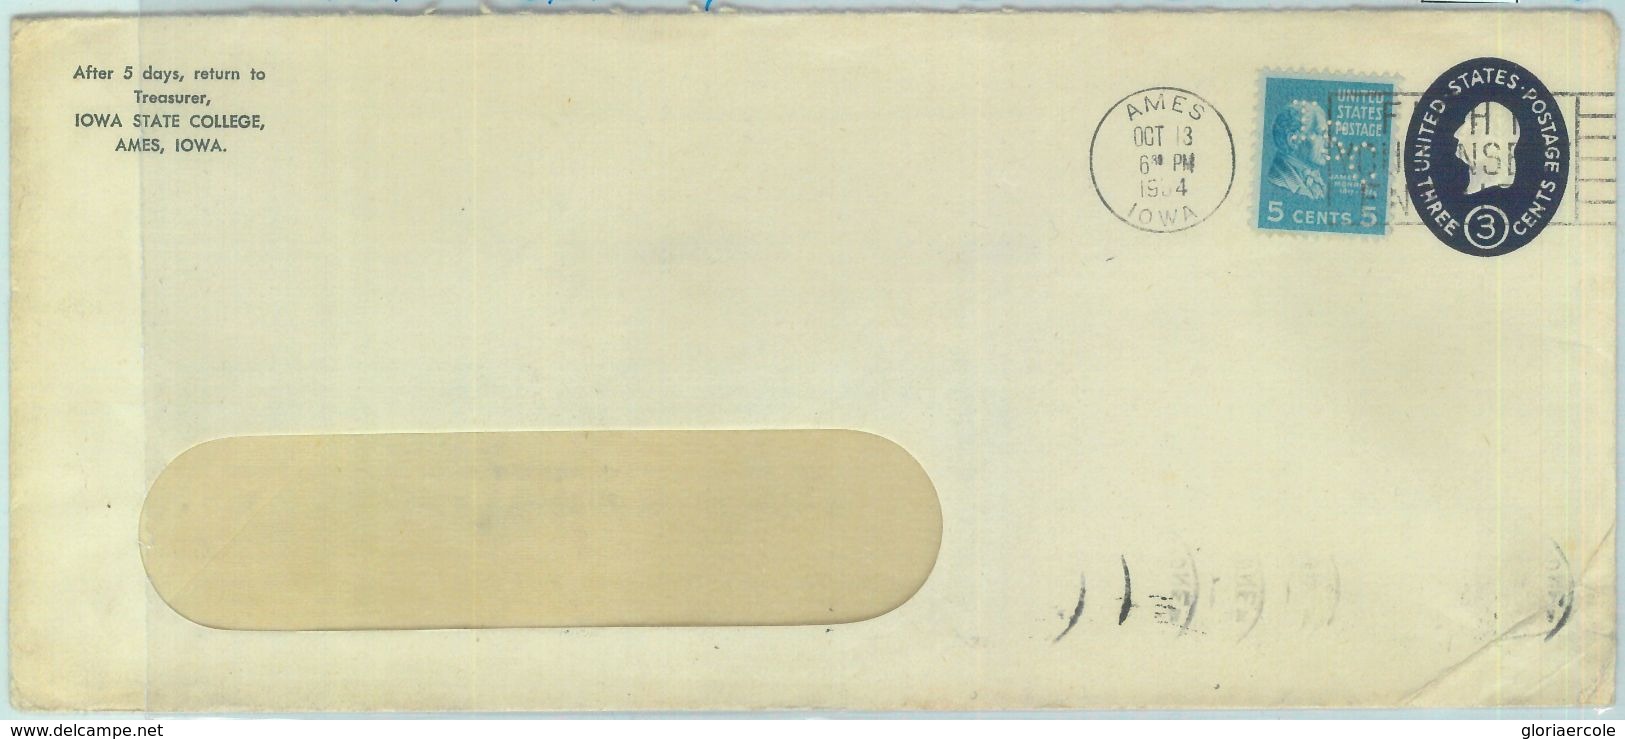 84345 - USA - POSTAL HISTORY - PERFIN Stamp On POSTAL STATIONERY COVER  1954 - 1941-60